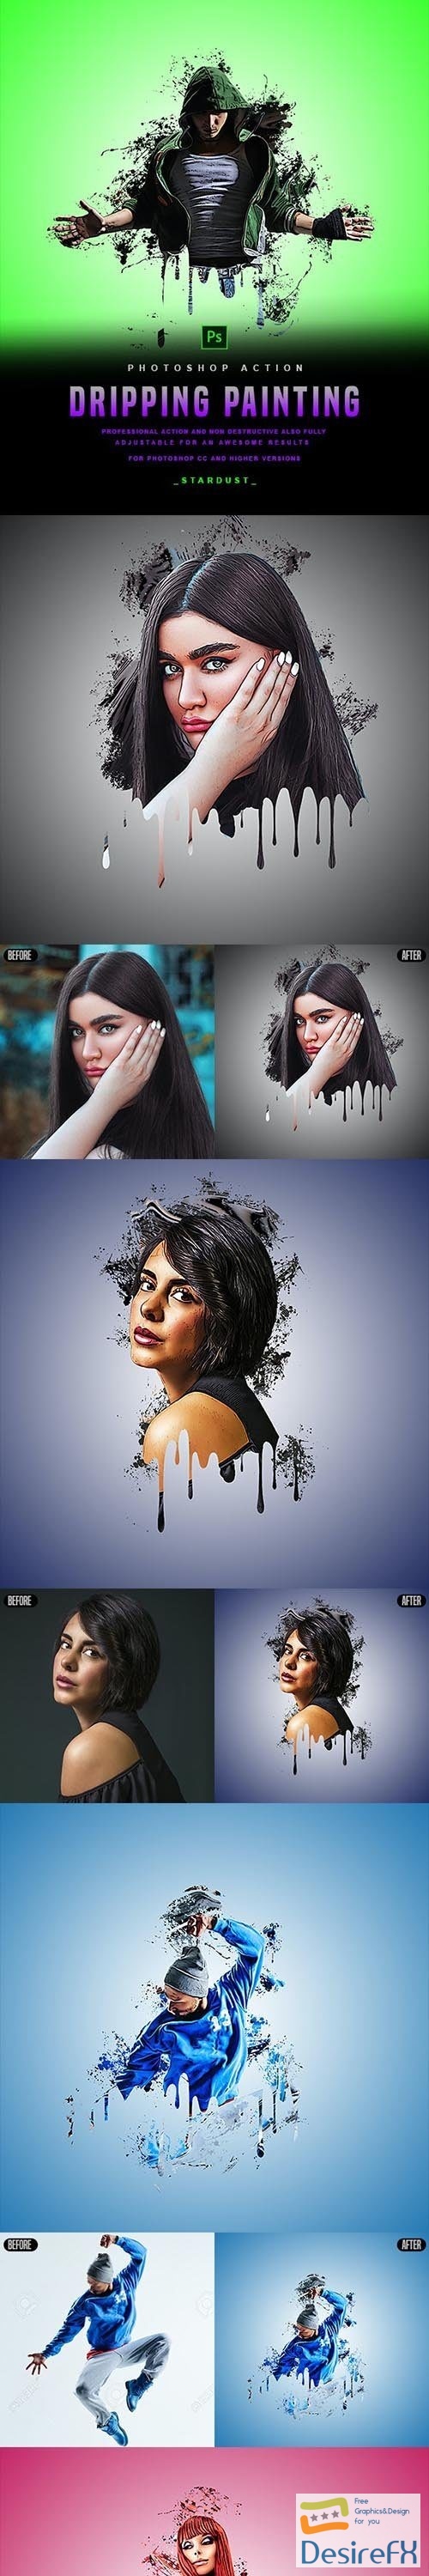 Dripping Painting - Photoshop Action 29878099